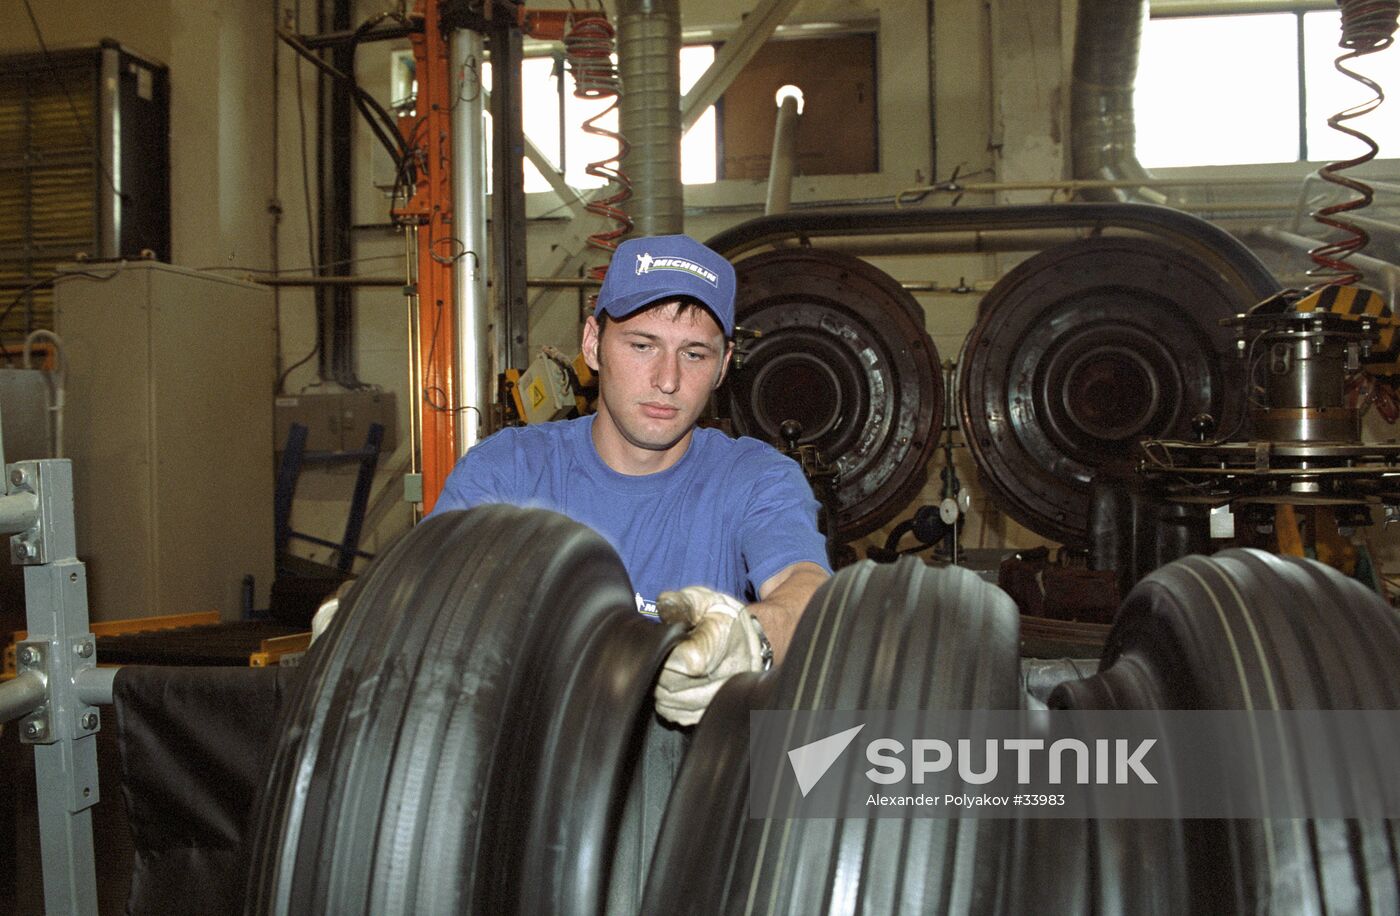 WORKER TIRES PLANT